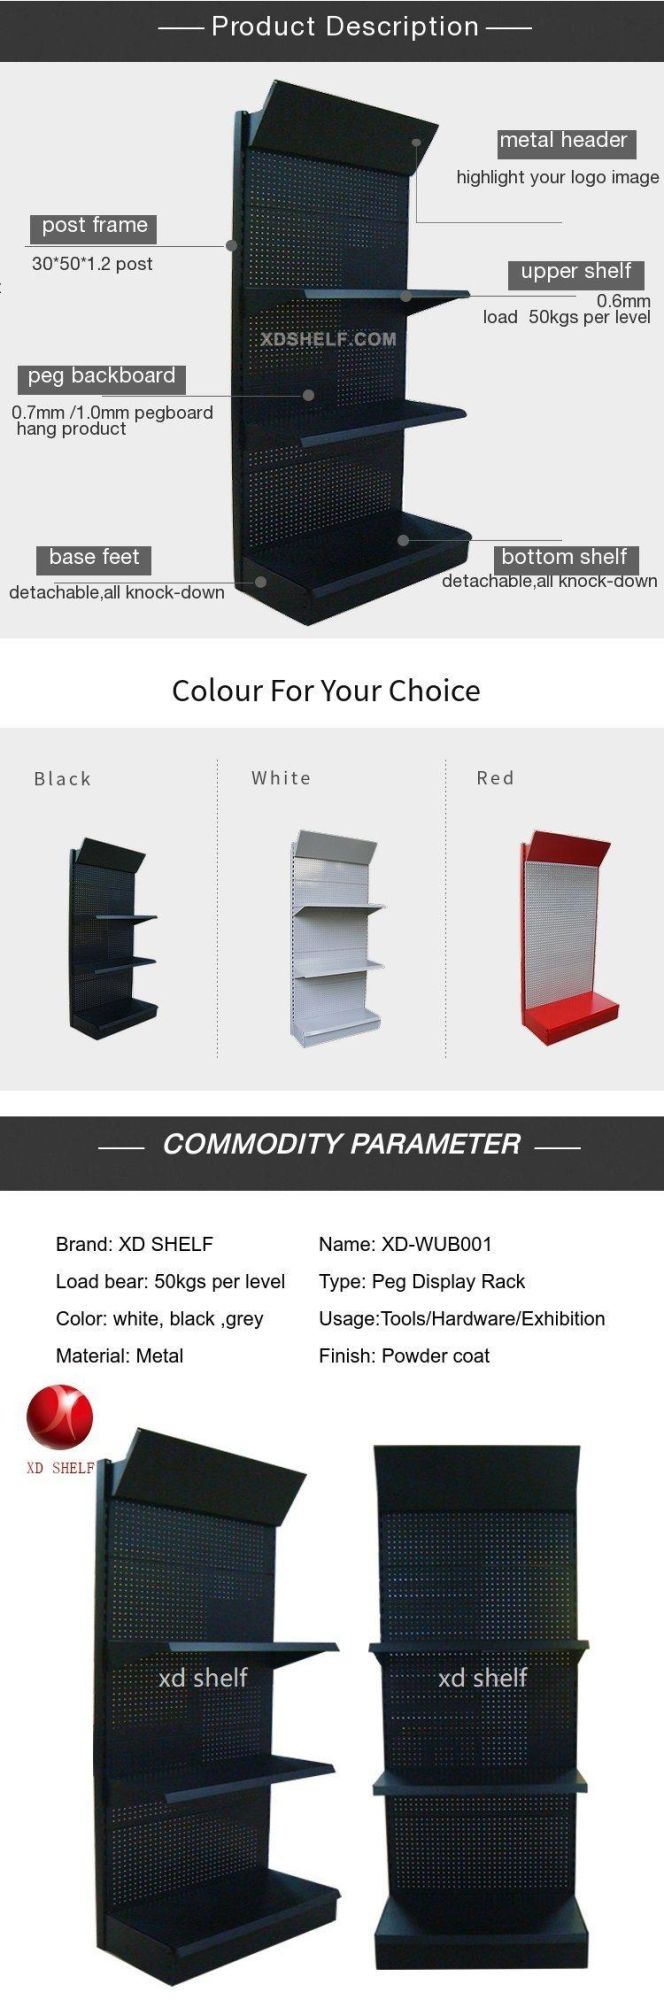 Premium Products Tools Display Stand with Light Box Spot Light Upgrade Brand Signs Metal Exhibition Advertising Display Stand